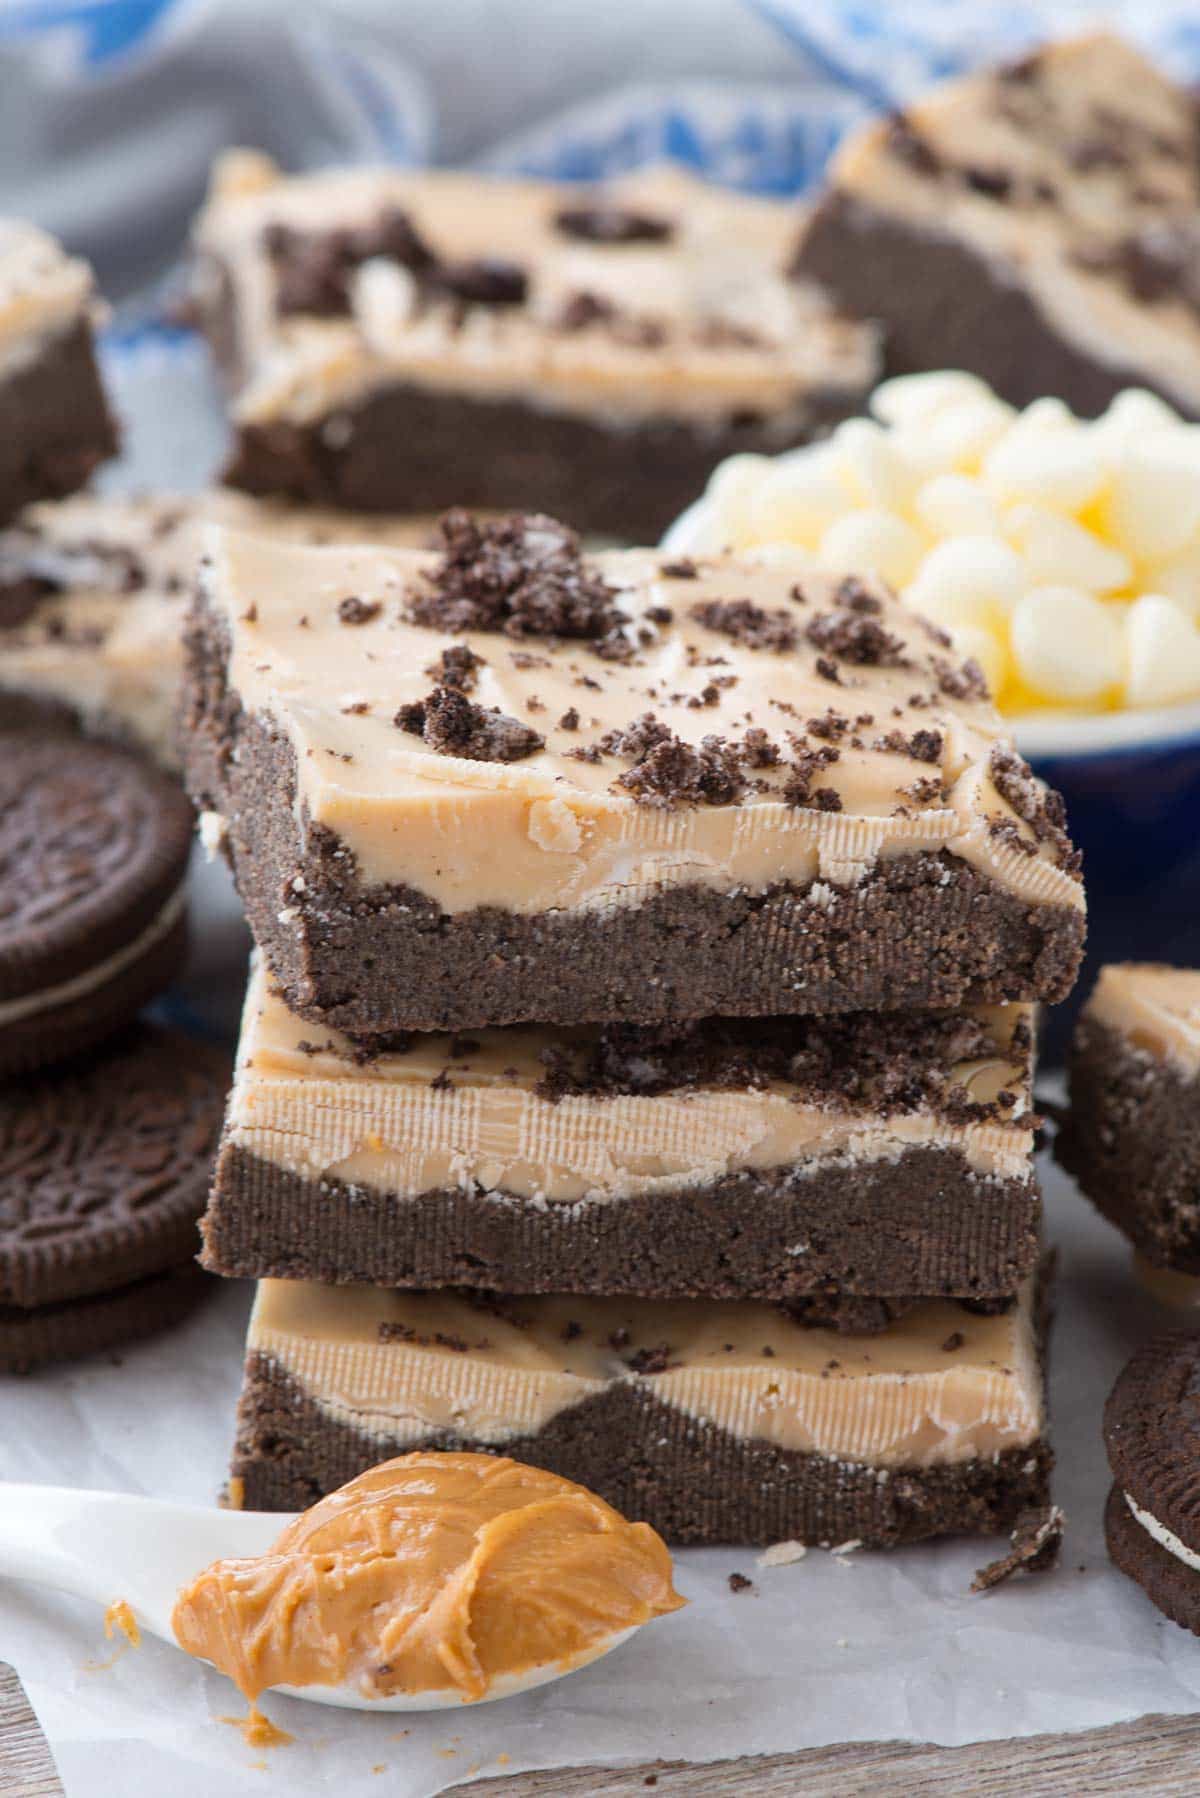 No Bake Oreo Peanut Butter Bars - this easy no bake peanut butter bar recipe uses OREOS instead of crackers! It's chocolate and peanut butter amazingness!